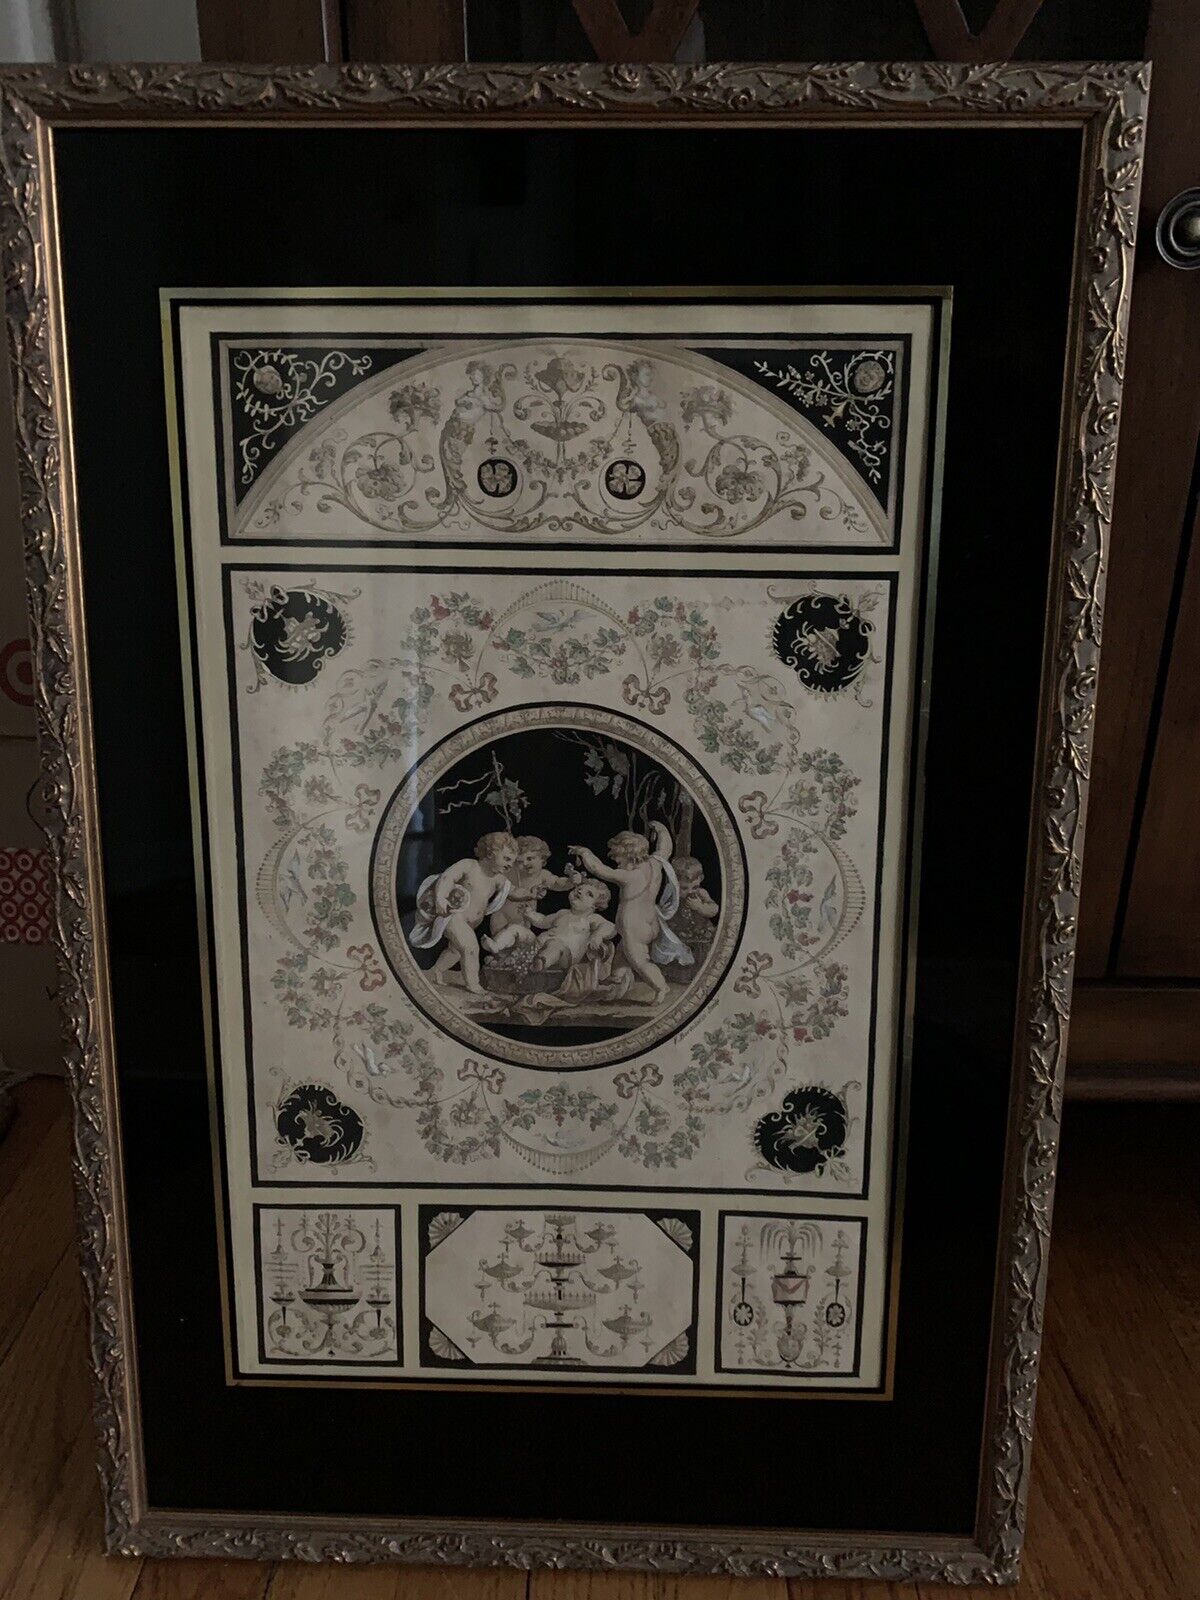 THREE ANTIQUE 18th CENTURY ITALIAN HAND-COLORED ENGRAVINGS - MATTED AND FRAMED Без бренда - фотография #7